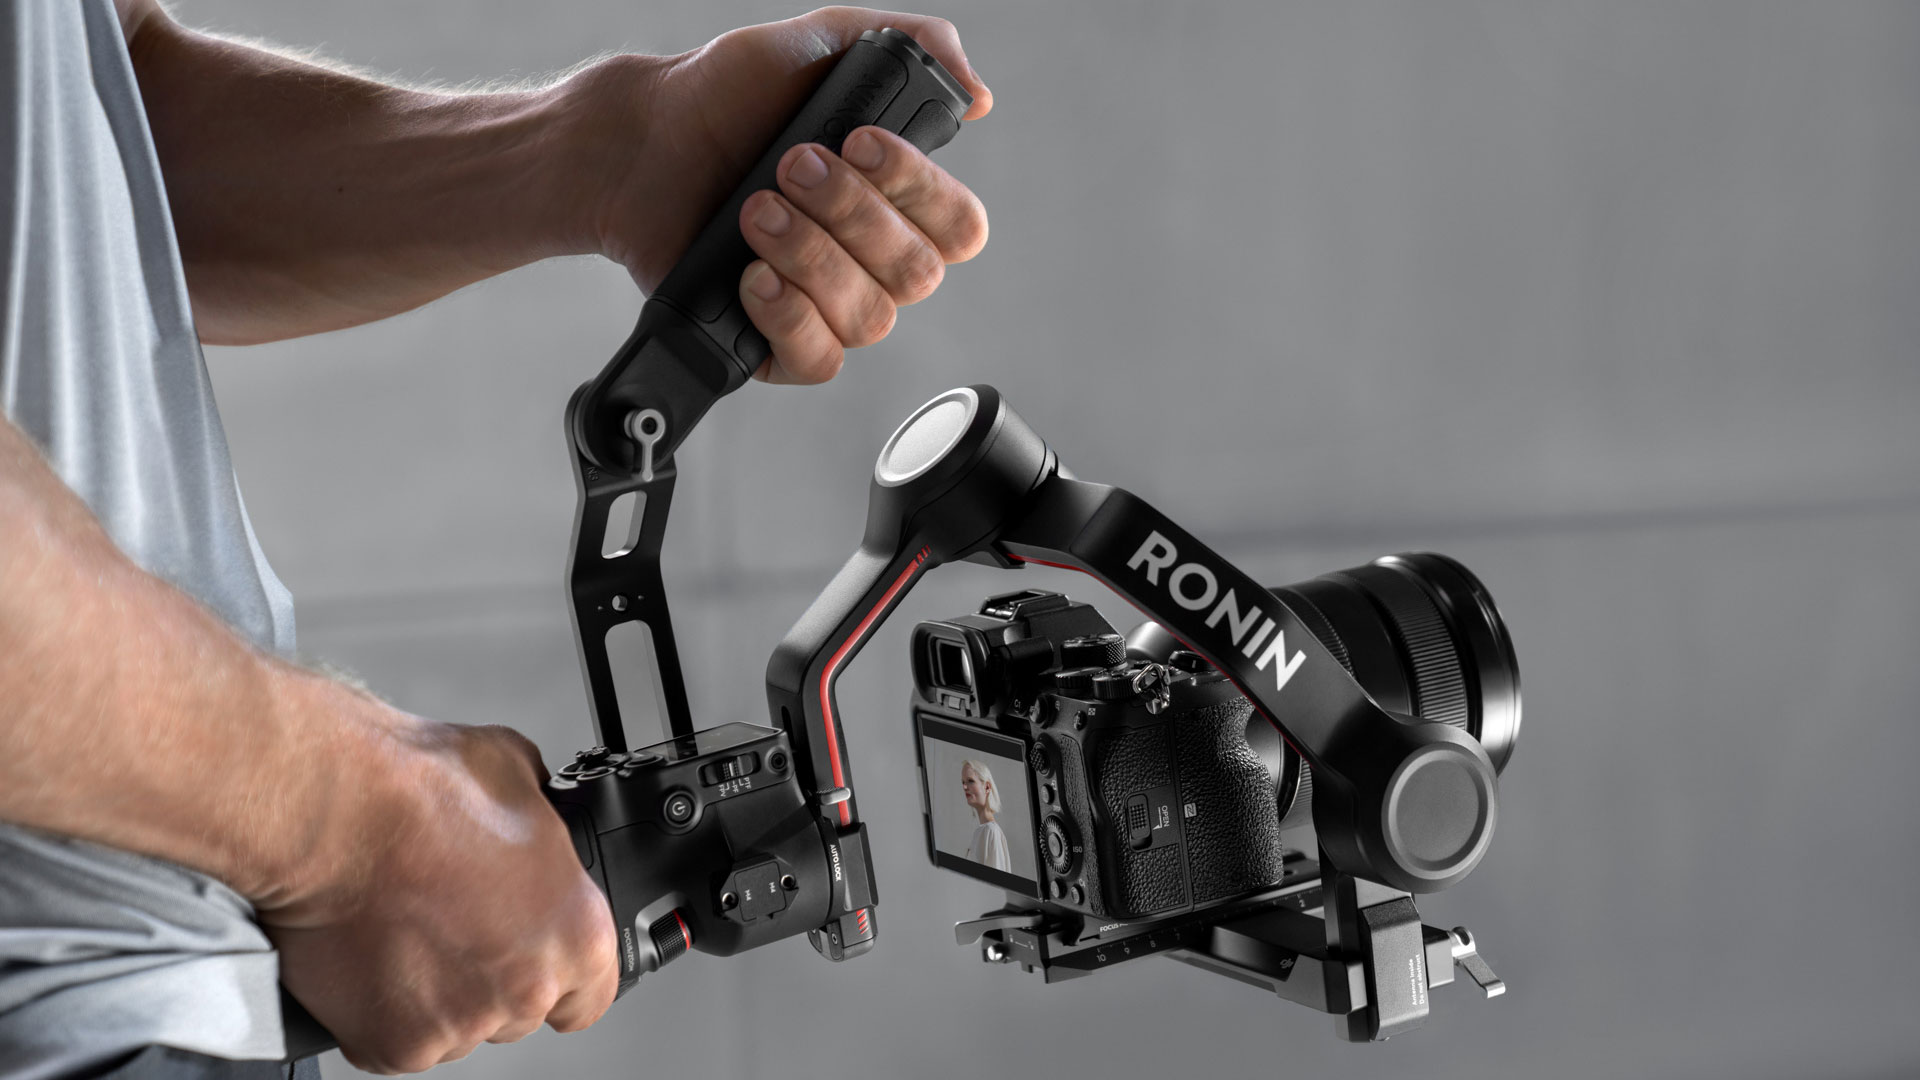 DJI RS 3 and RS 3 Pro Gimbals Announced - Same Payload, New